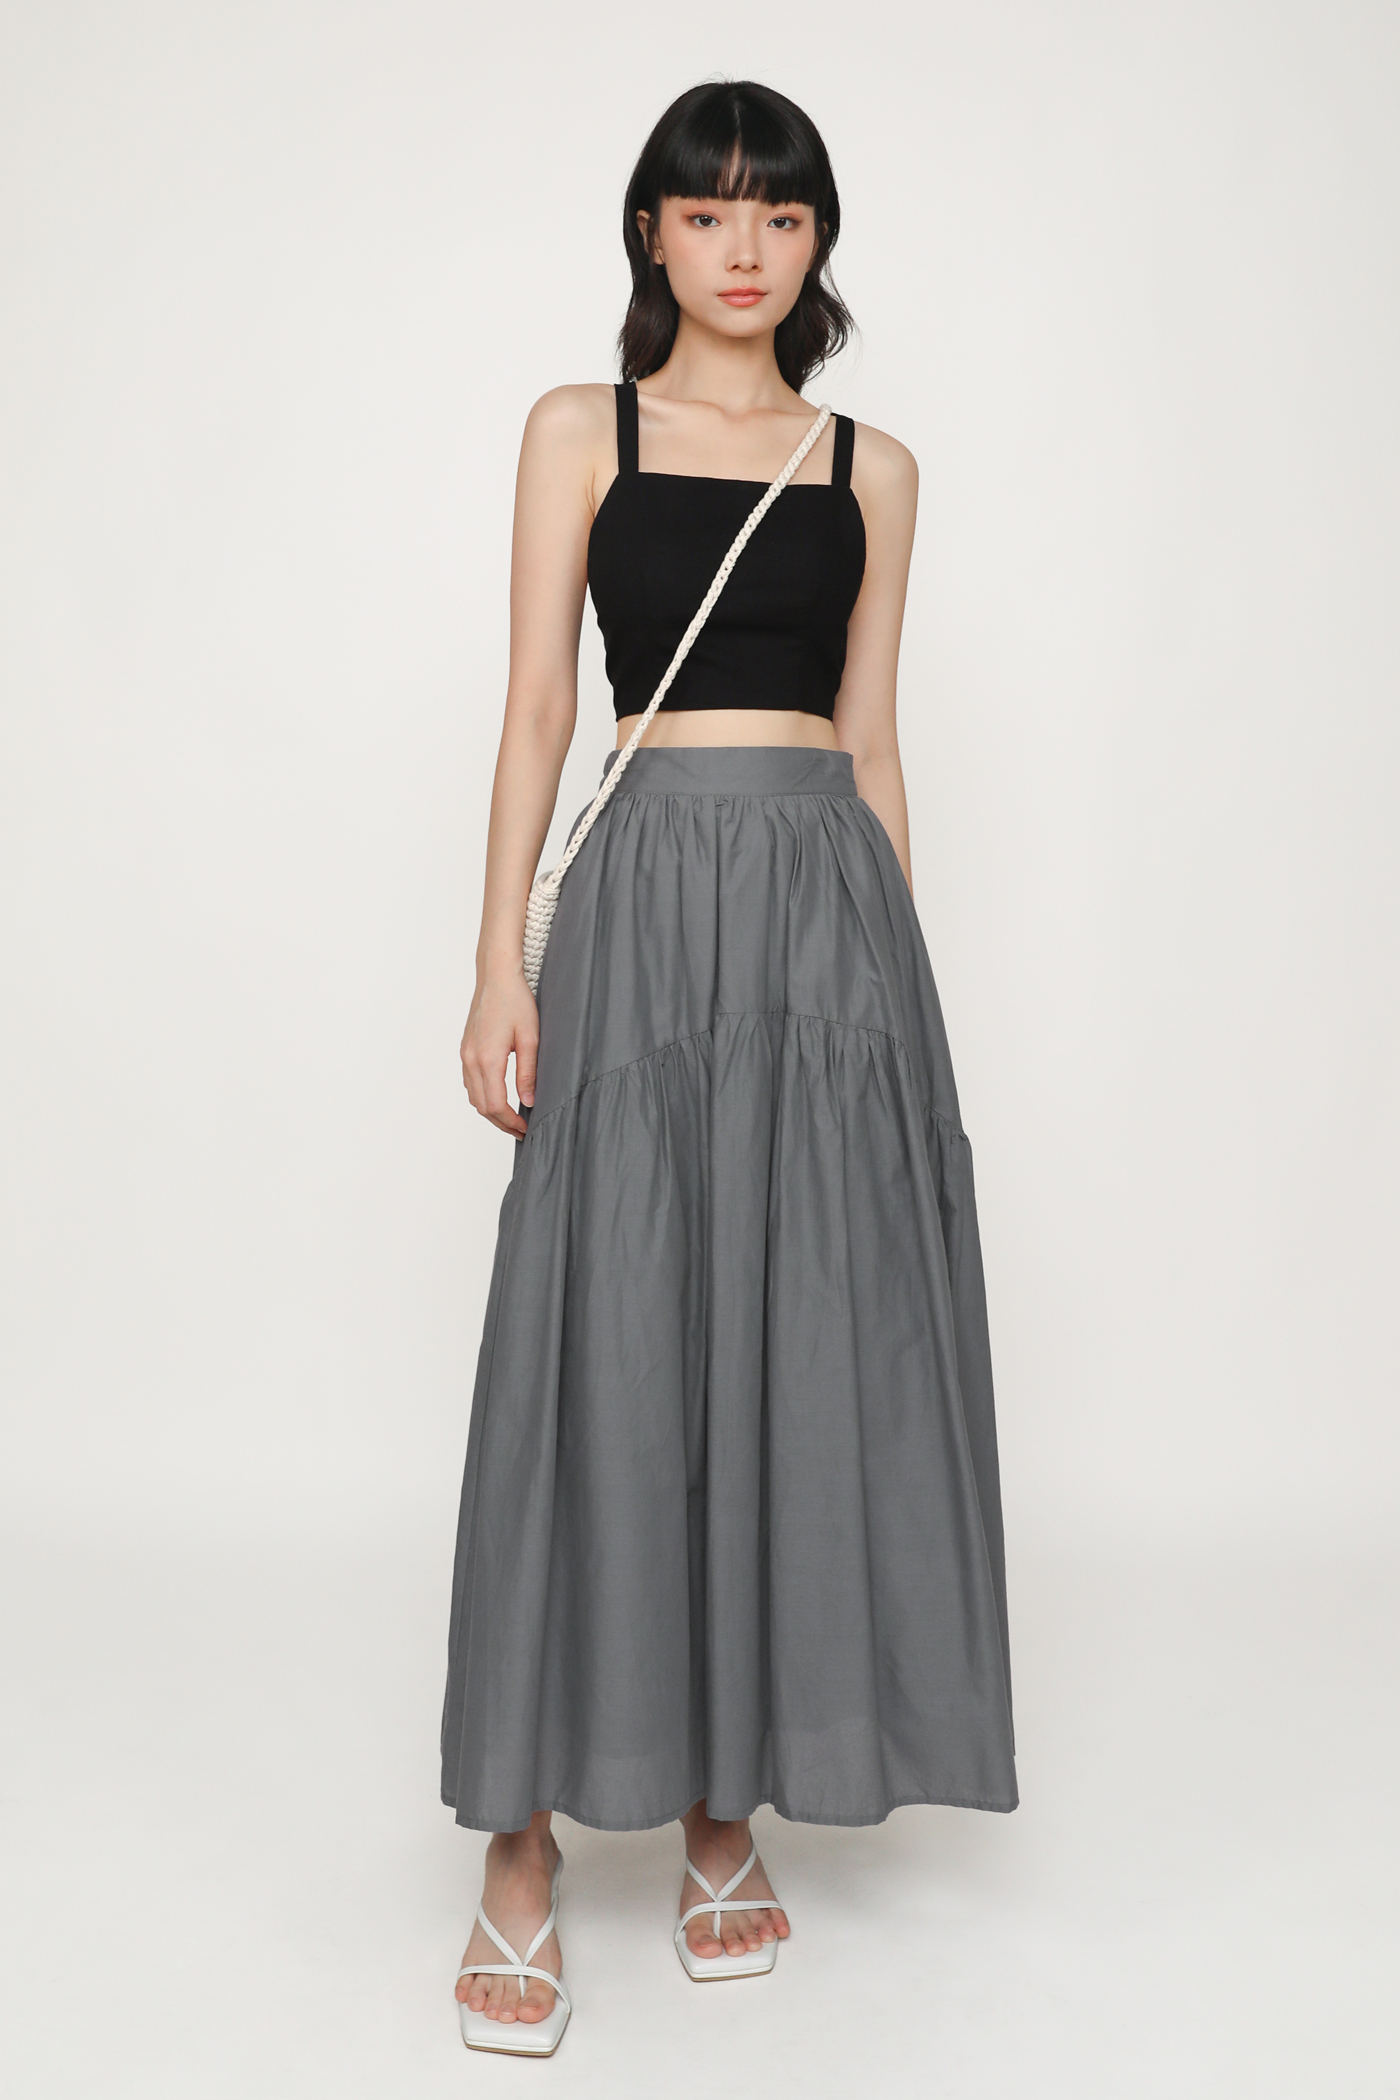 https://d1q5bpl6sg45iv.cloudfront.net/sites/files/ttr/images/products/202306/isabella-grey-tiered-maxi-skirt-image-1-the-tinsel-rack-singapore.jpg